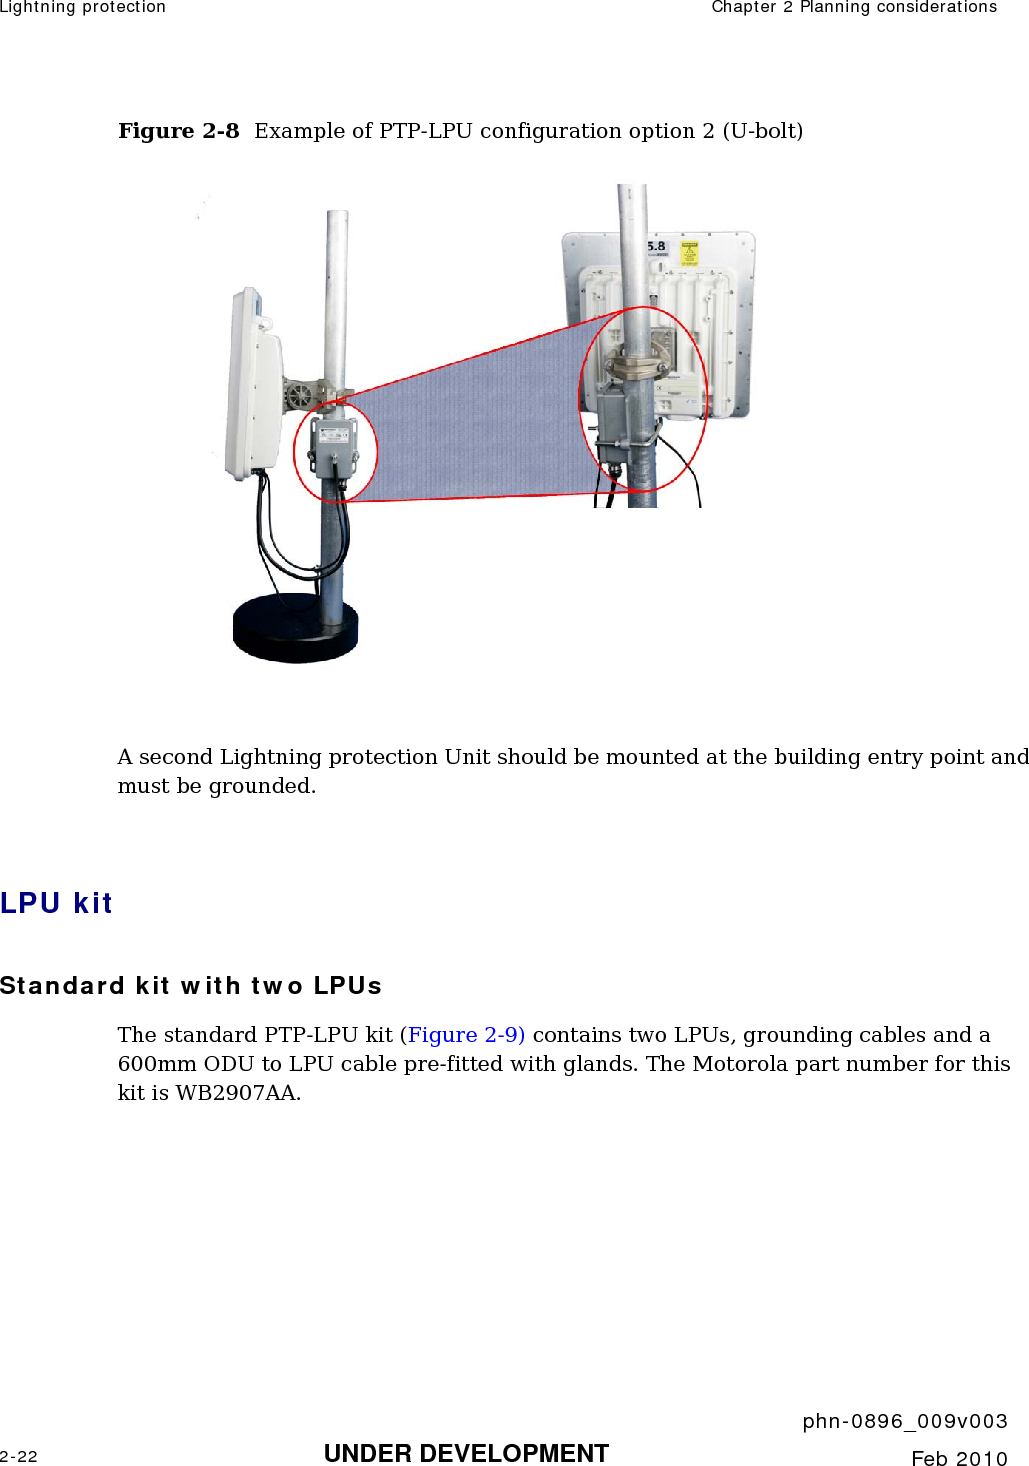 Lightning protection  Chapter 2 Planning considerations     phn-0896_009v003 2-22 UNDER DEVELOPMENT  Feb 2010  Figure 2-8  Example of PTP-LPU configuration option 2 (U-bolt)   A second Lightning protection Unit should be mounted at the building entry point and must be grounded.  LPU kit Standard kit with two LPUs The standard PTP-LPU kit (Figure 2-9) contains two LPUs, grounding cables and a 600mm ODU to LPU cable pre-fitted with glands. The Motorola part number for this kit is WB2907AA.  